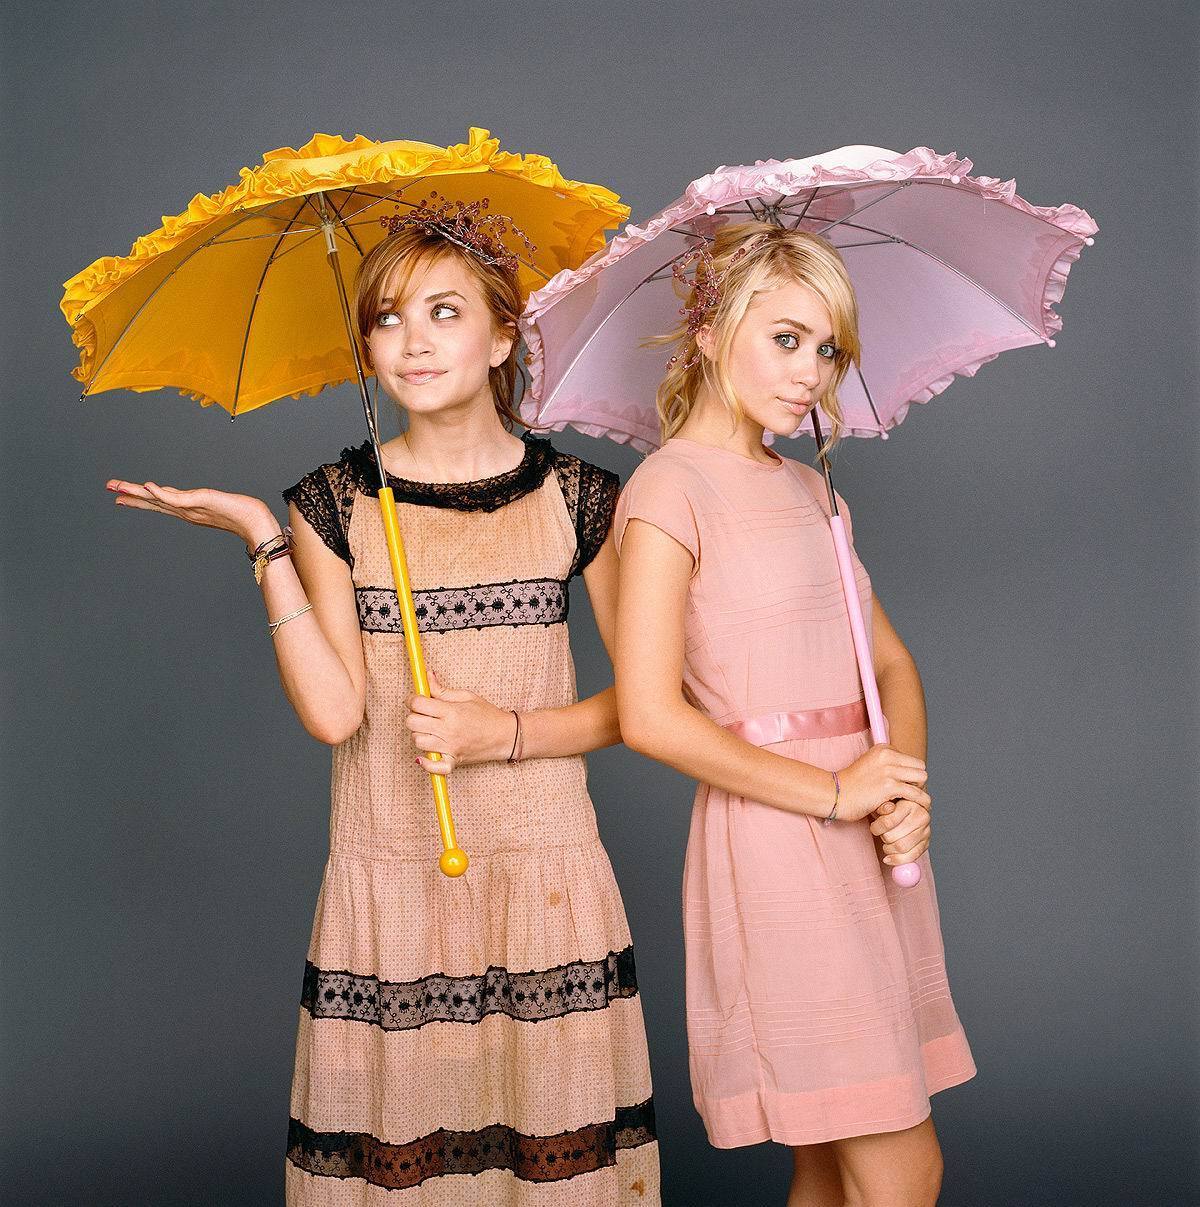 Olsen Twins Mary Kate And Ashley Olsen Photo 3928709 Fanpop Page 8